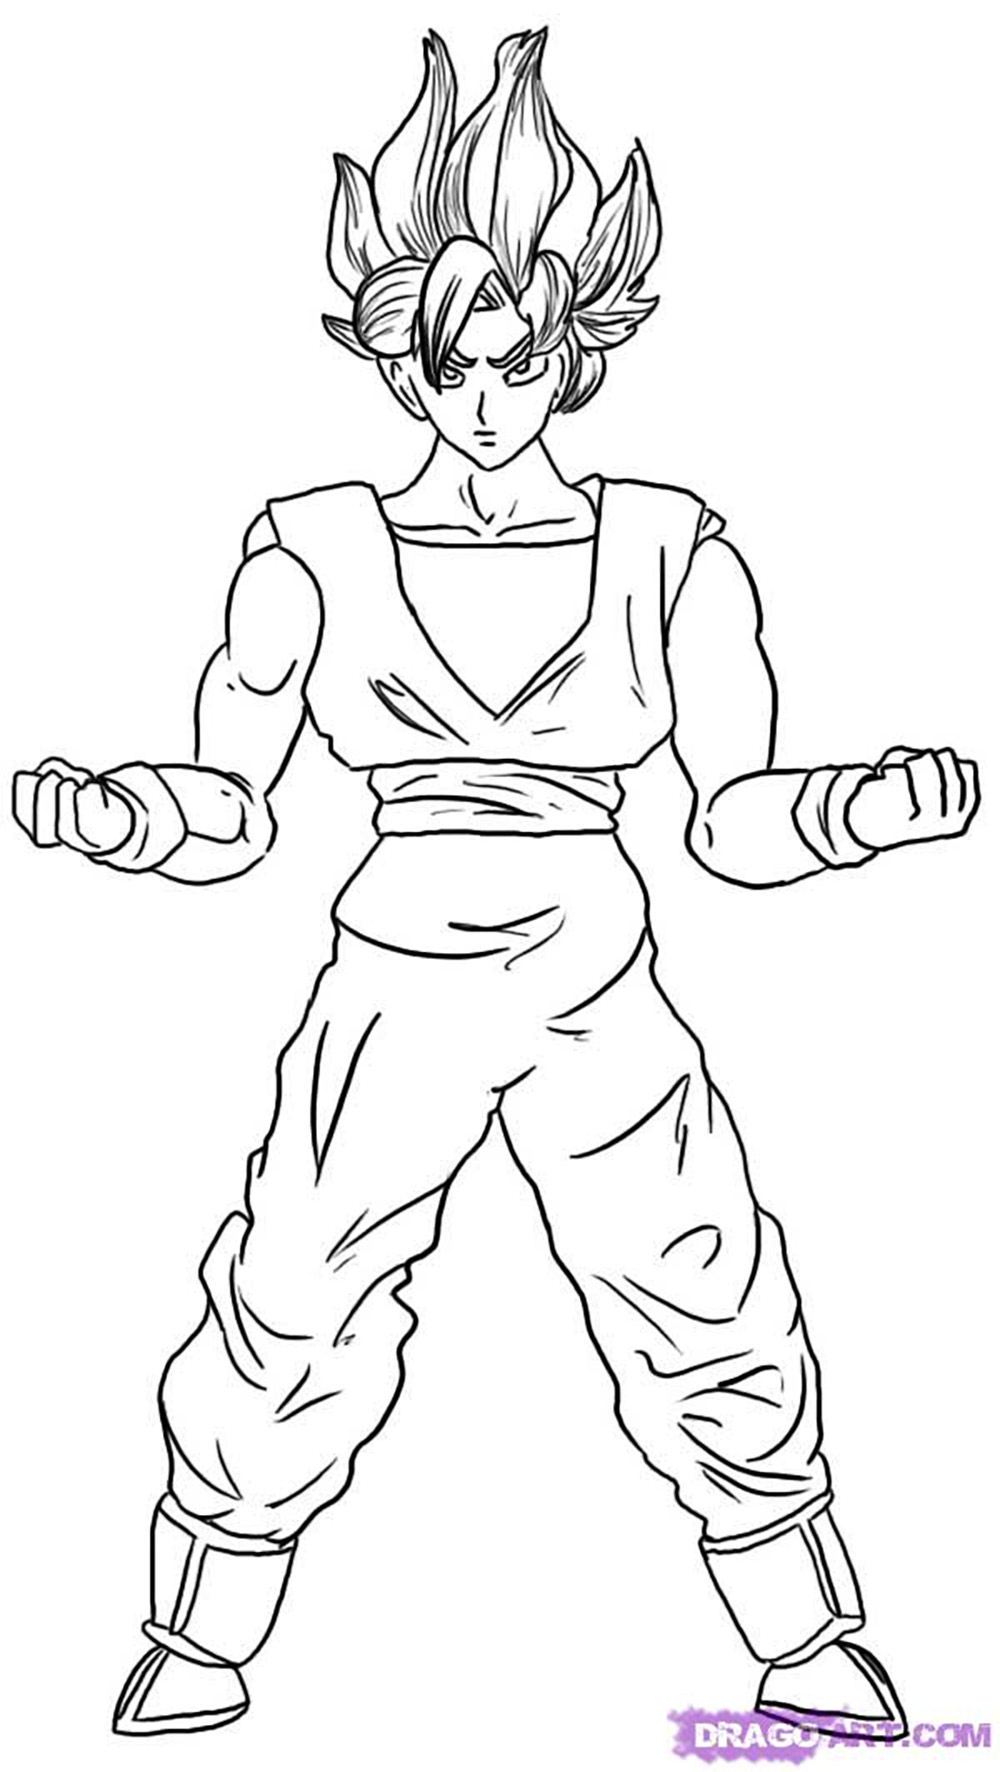 Simple Dragon Ball Z coloring page for kids : Songoku